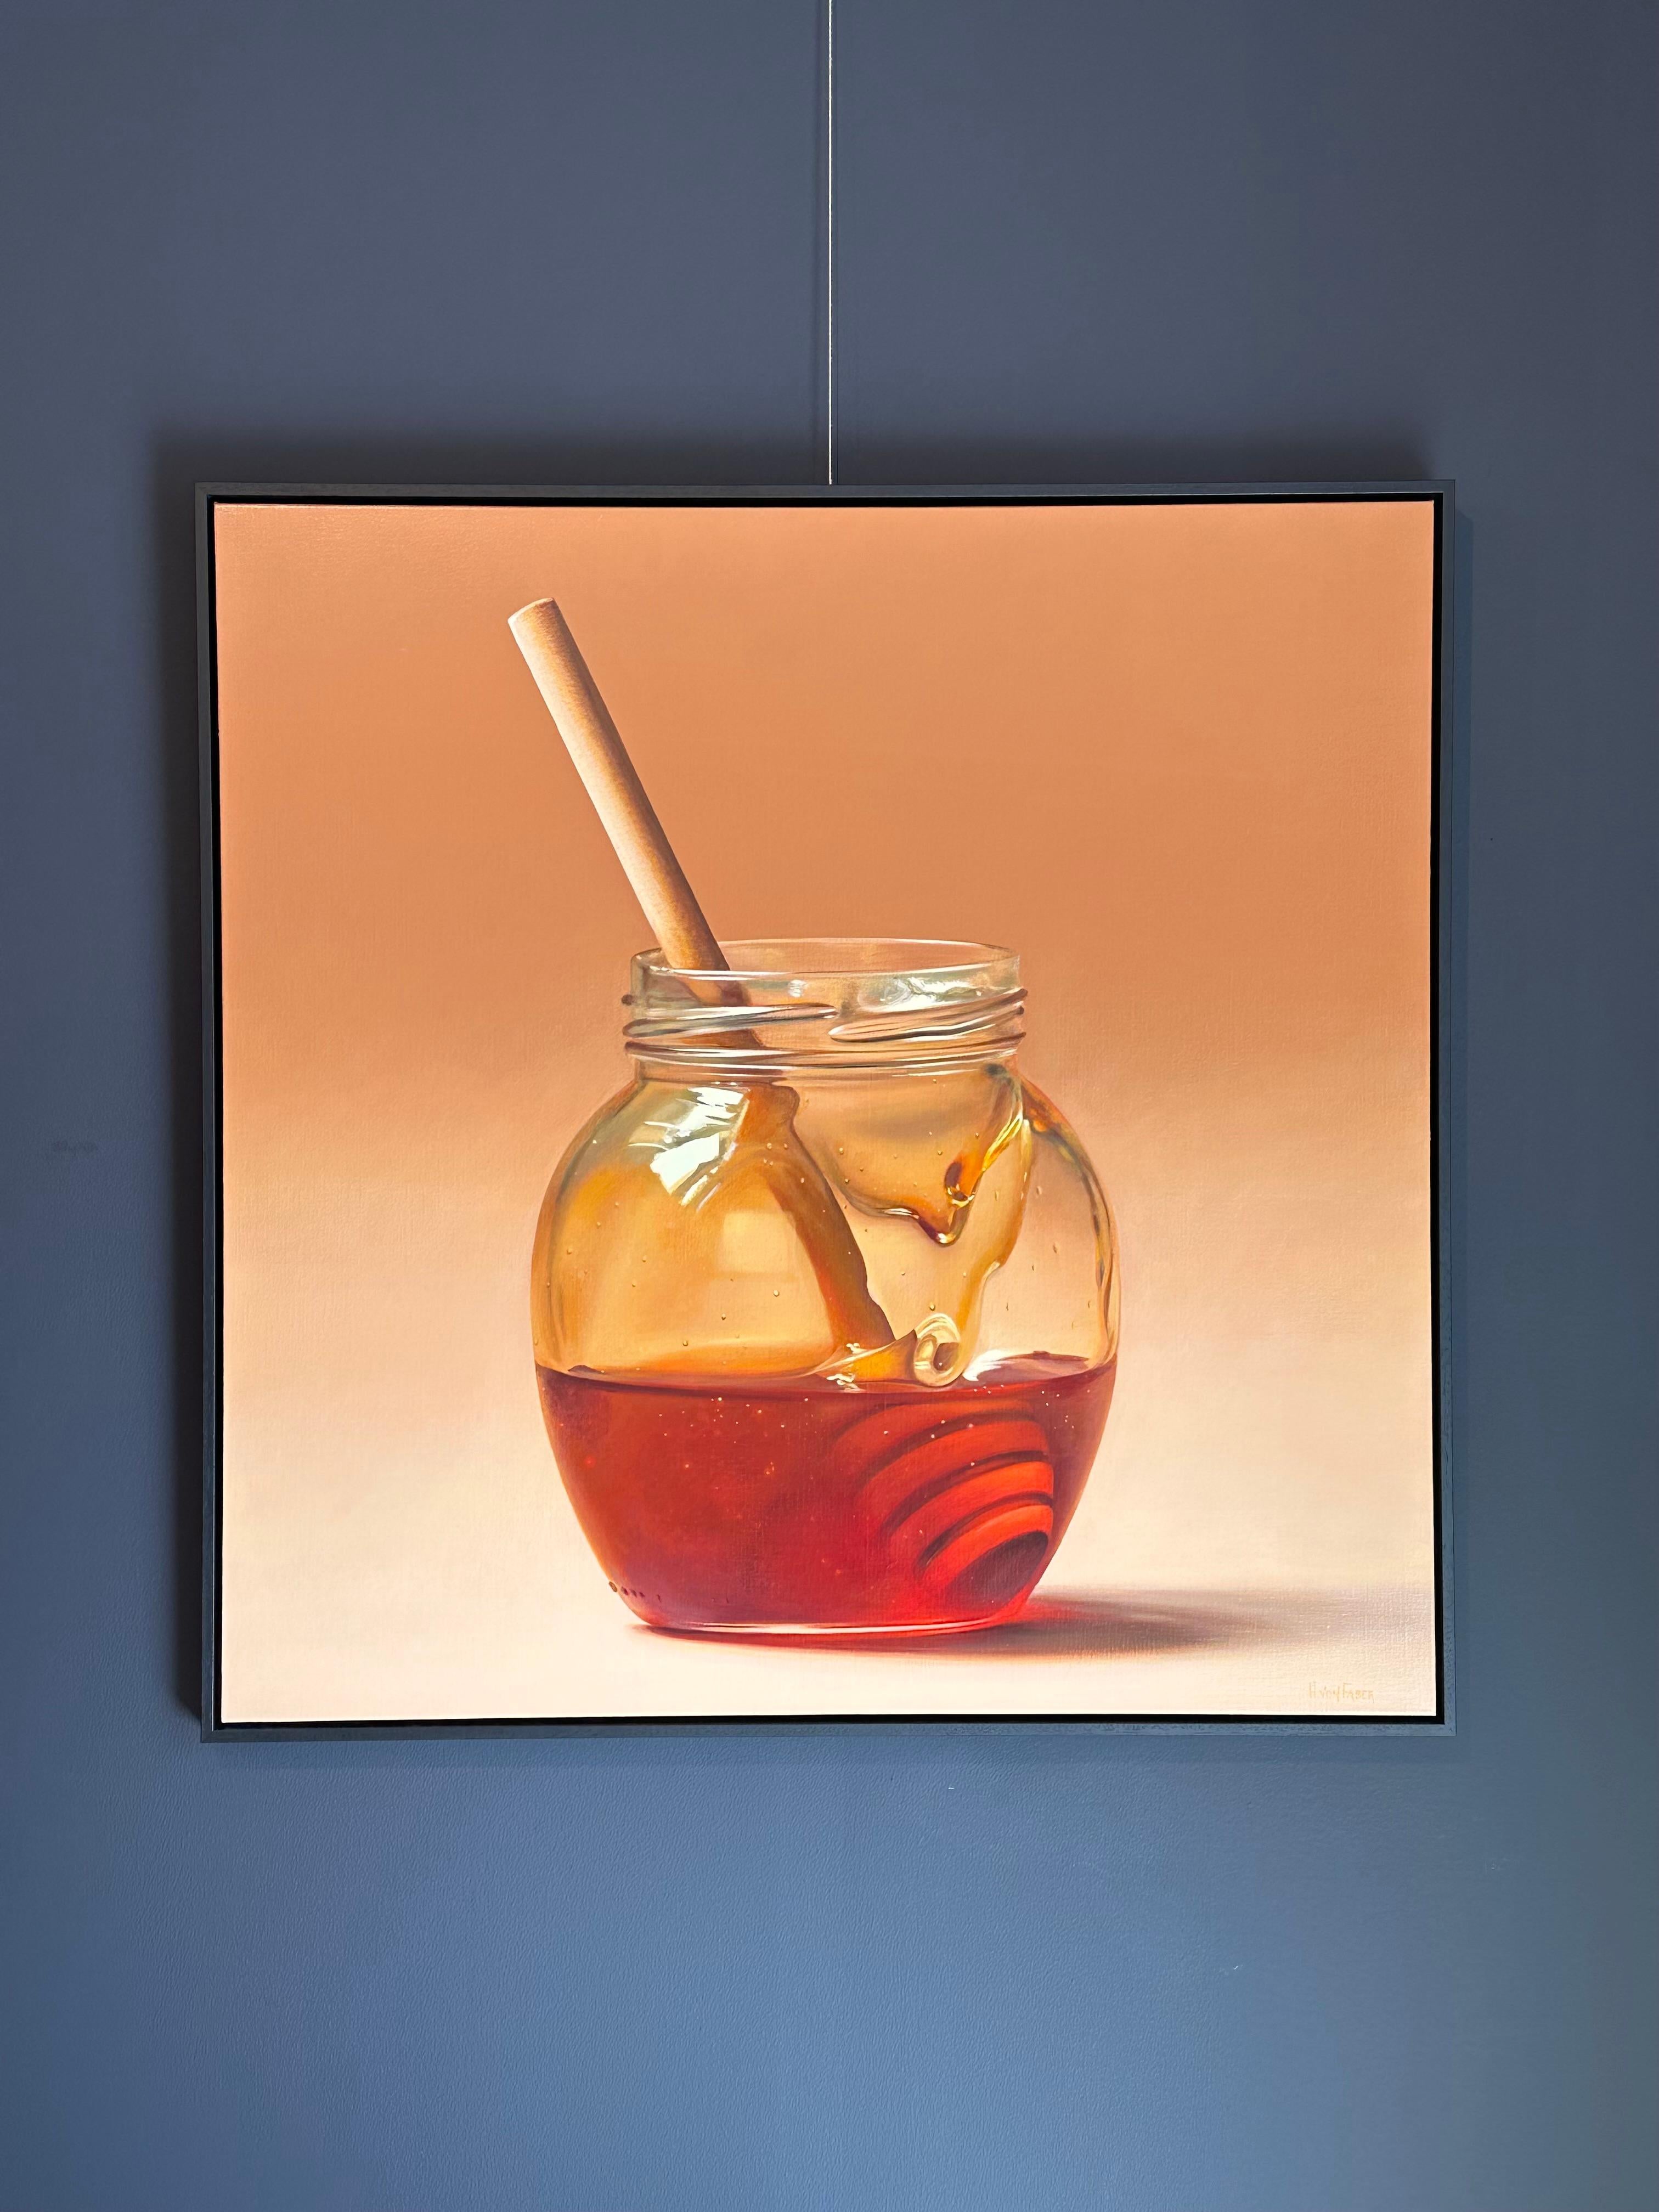 Heidi von Faber
Honey spoon in jar
Acrylic on linen
100 x 100 cm ( framed/ included in price 105 x 105 cm)

Dutch artist Heidi Von Faber lives and works in The Hague. 

The Stillllifes she paints are modern but made according the tradition of the